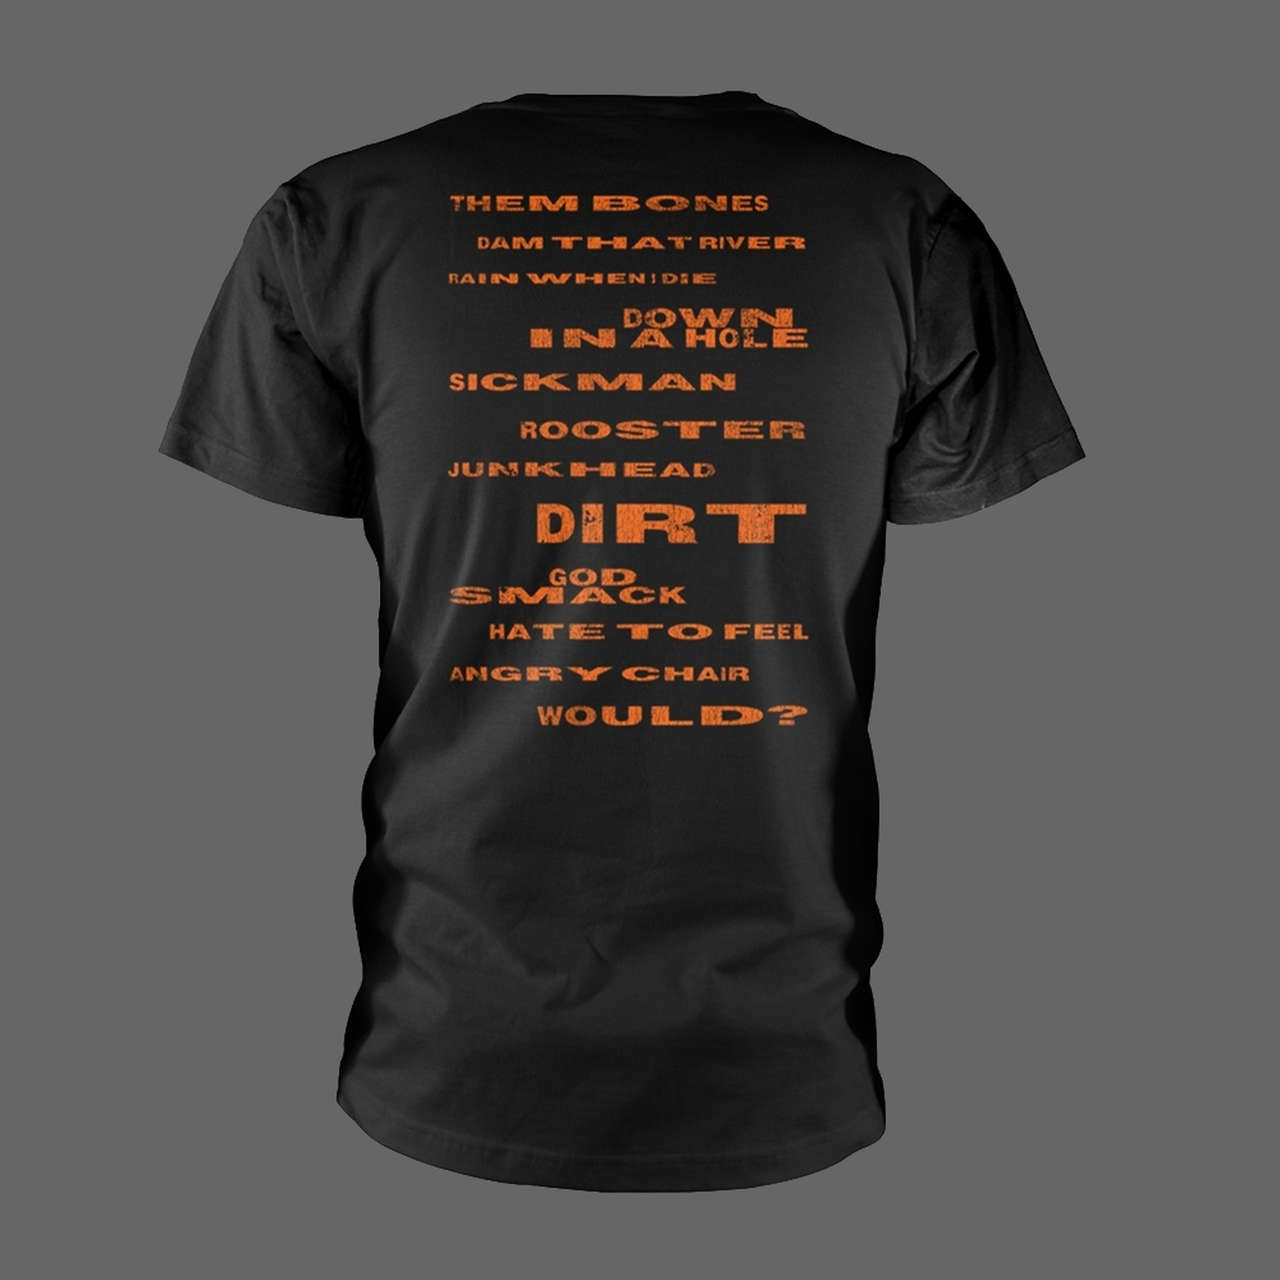 Alice in Chains - Dirt (Distressed) (T-Shirt)